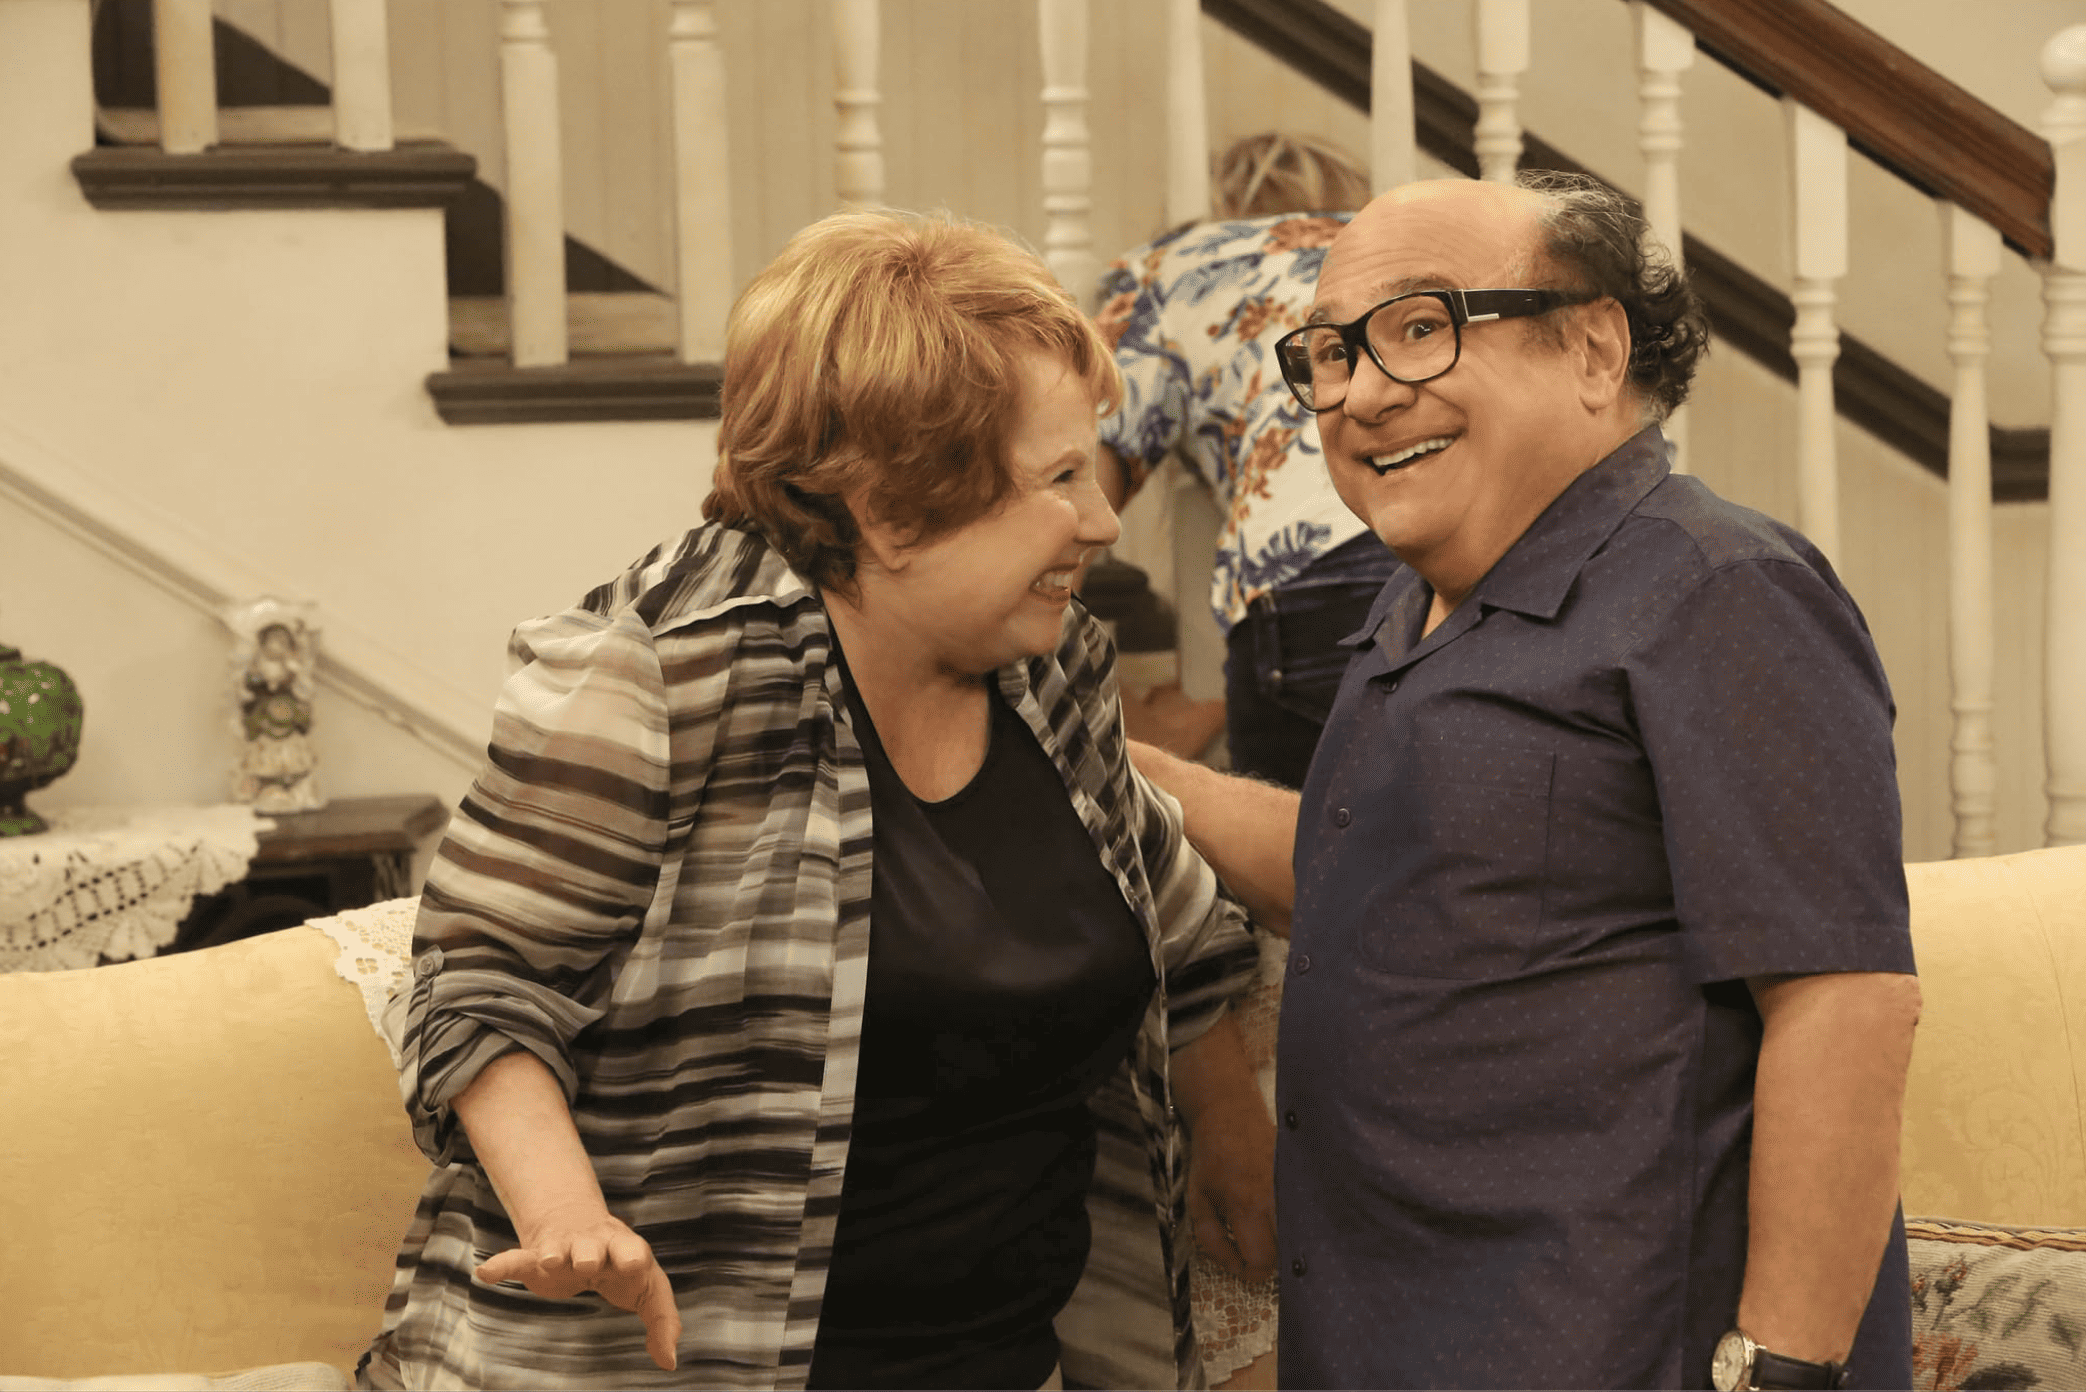 Lynne Marie Stewart and Danny DeVito in this image from 3 Arts Entertainment